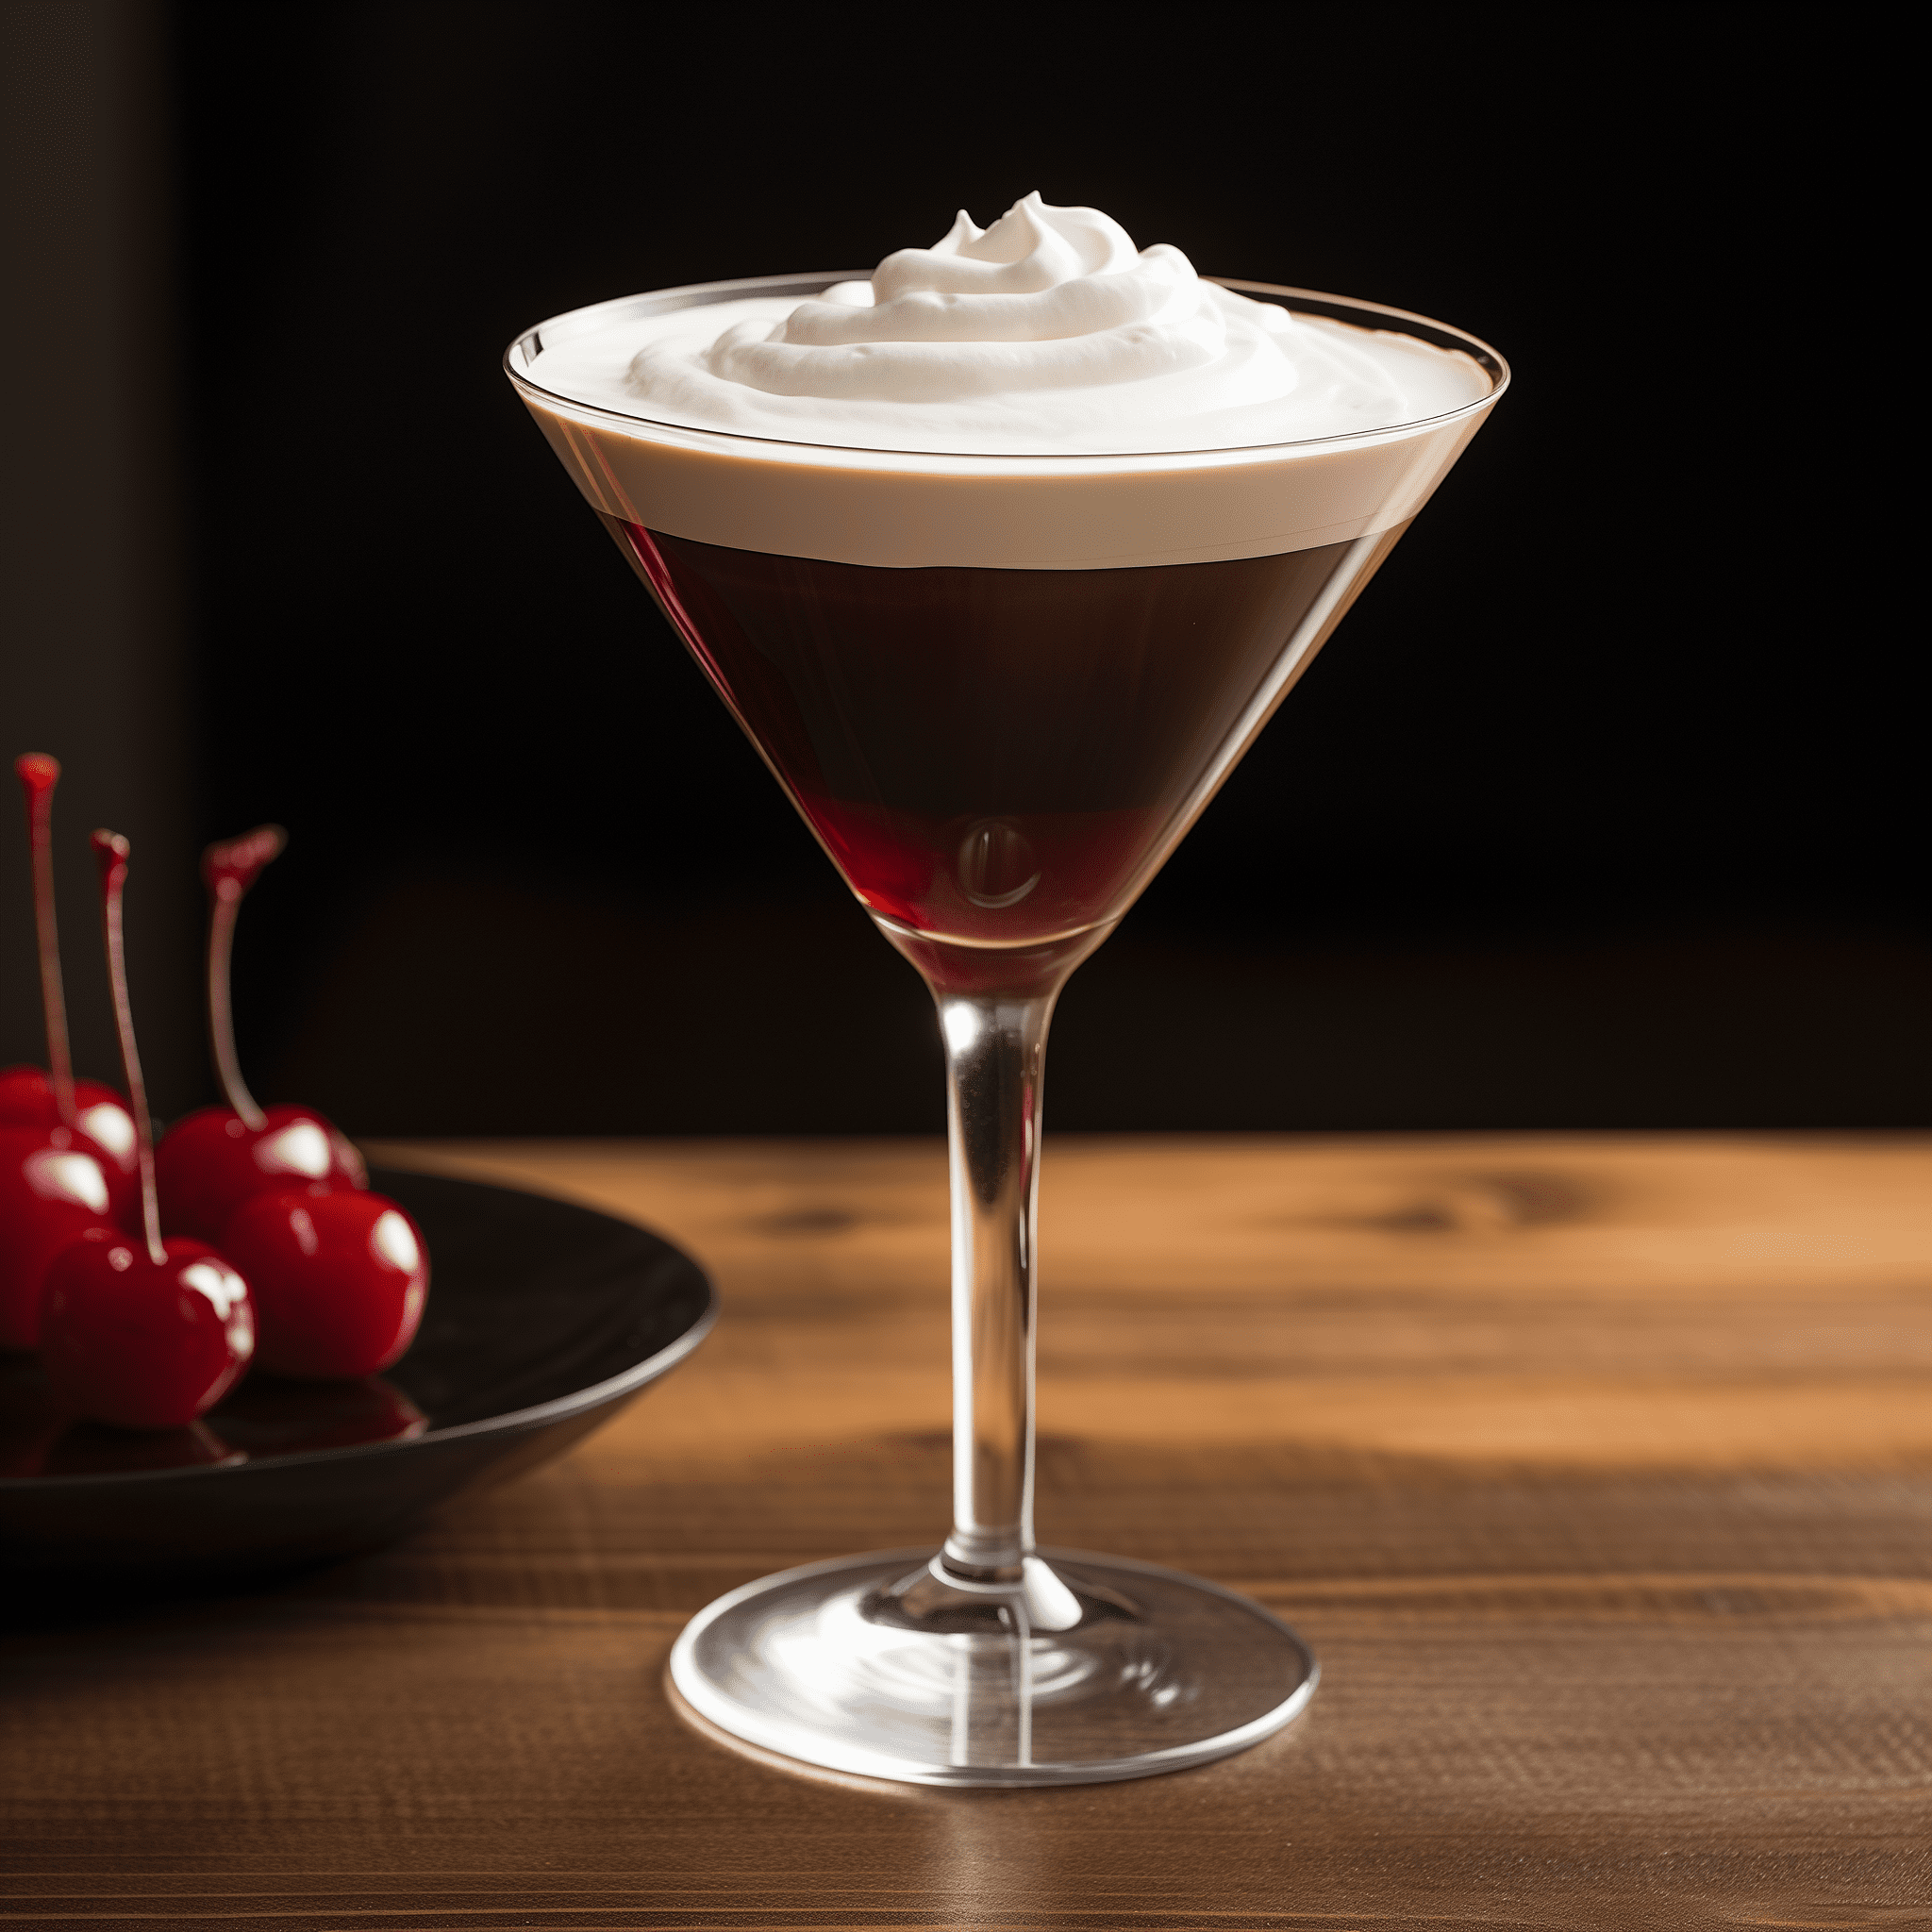 Choclatini Cocktail Recipe - The Choclatini is a sweet, creamy, and rich cocktail with a velvety chocolate flavor complemented by the smooth vanilla notes from the vodka. It's indulgent, with a dessert-like quality that makes it a perfect after-dinner treat.